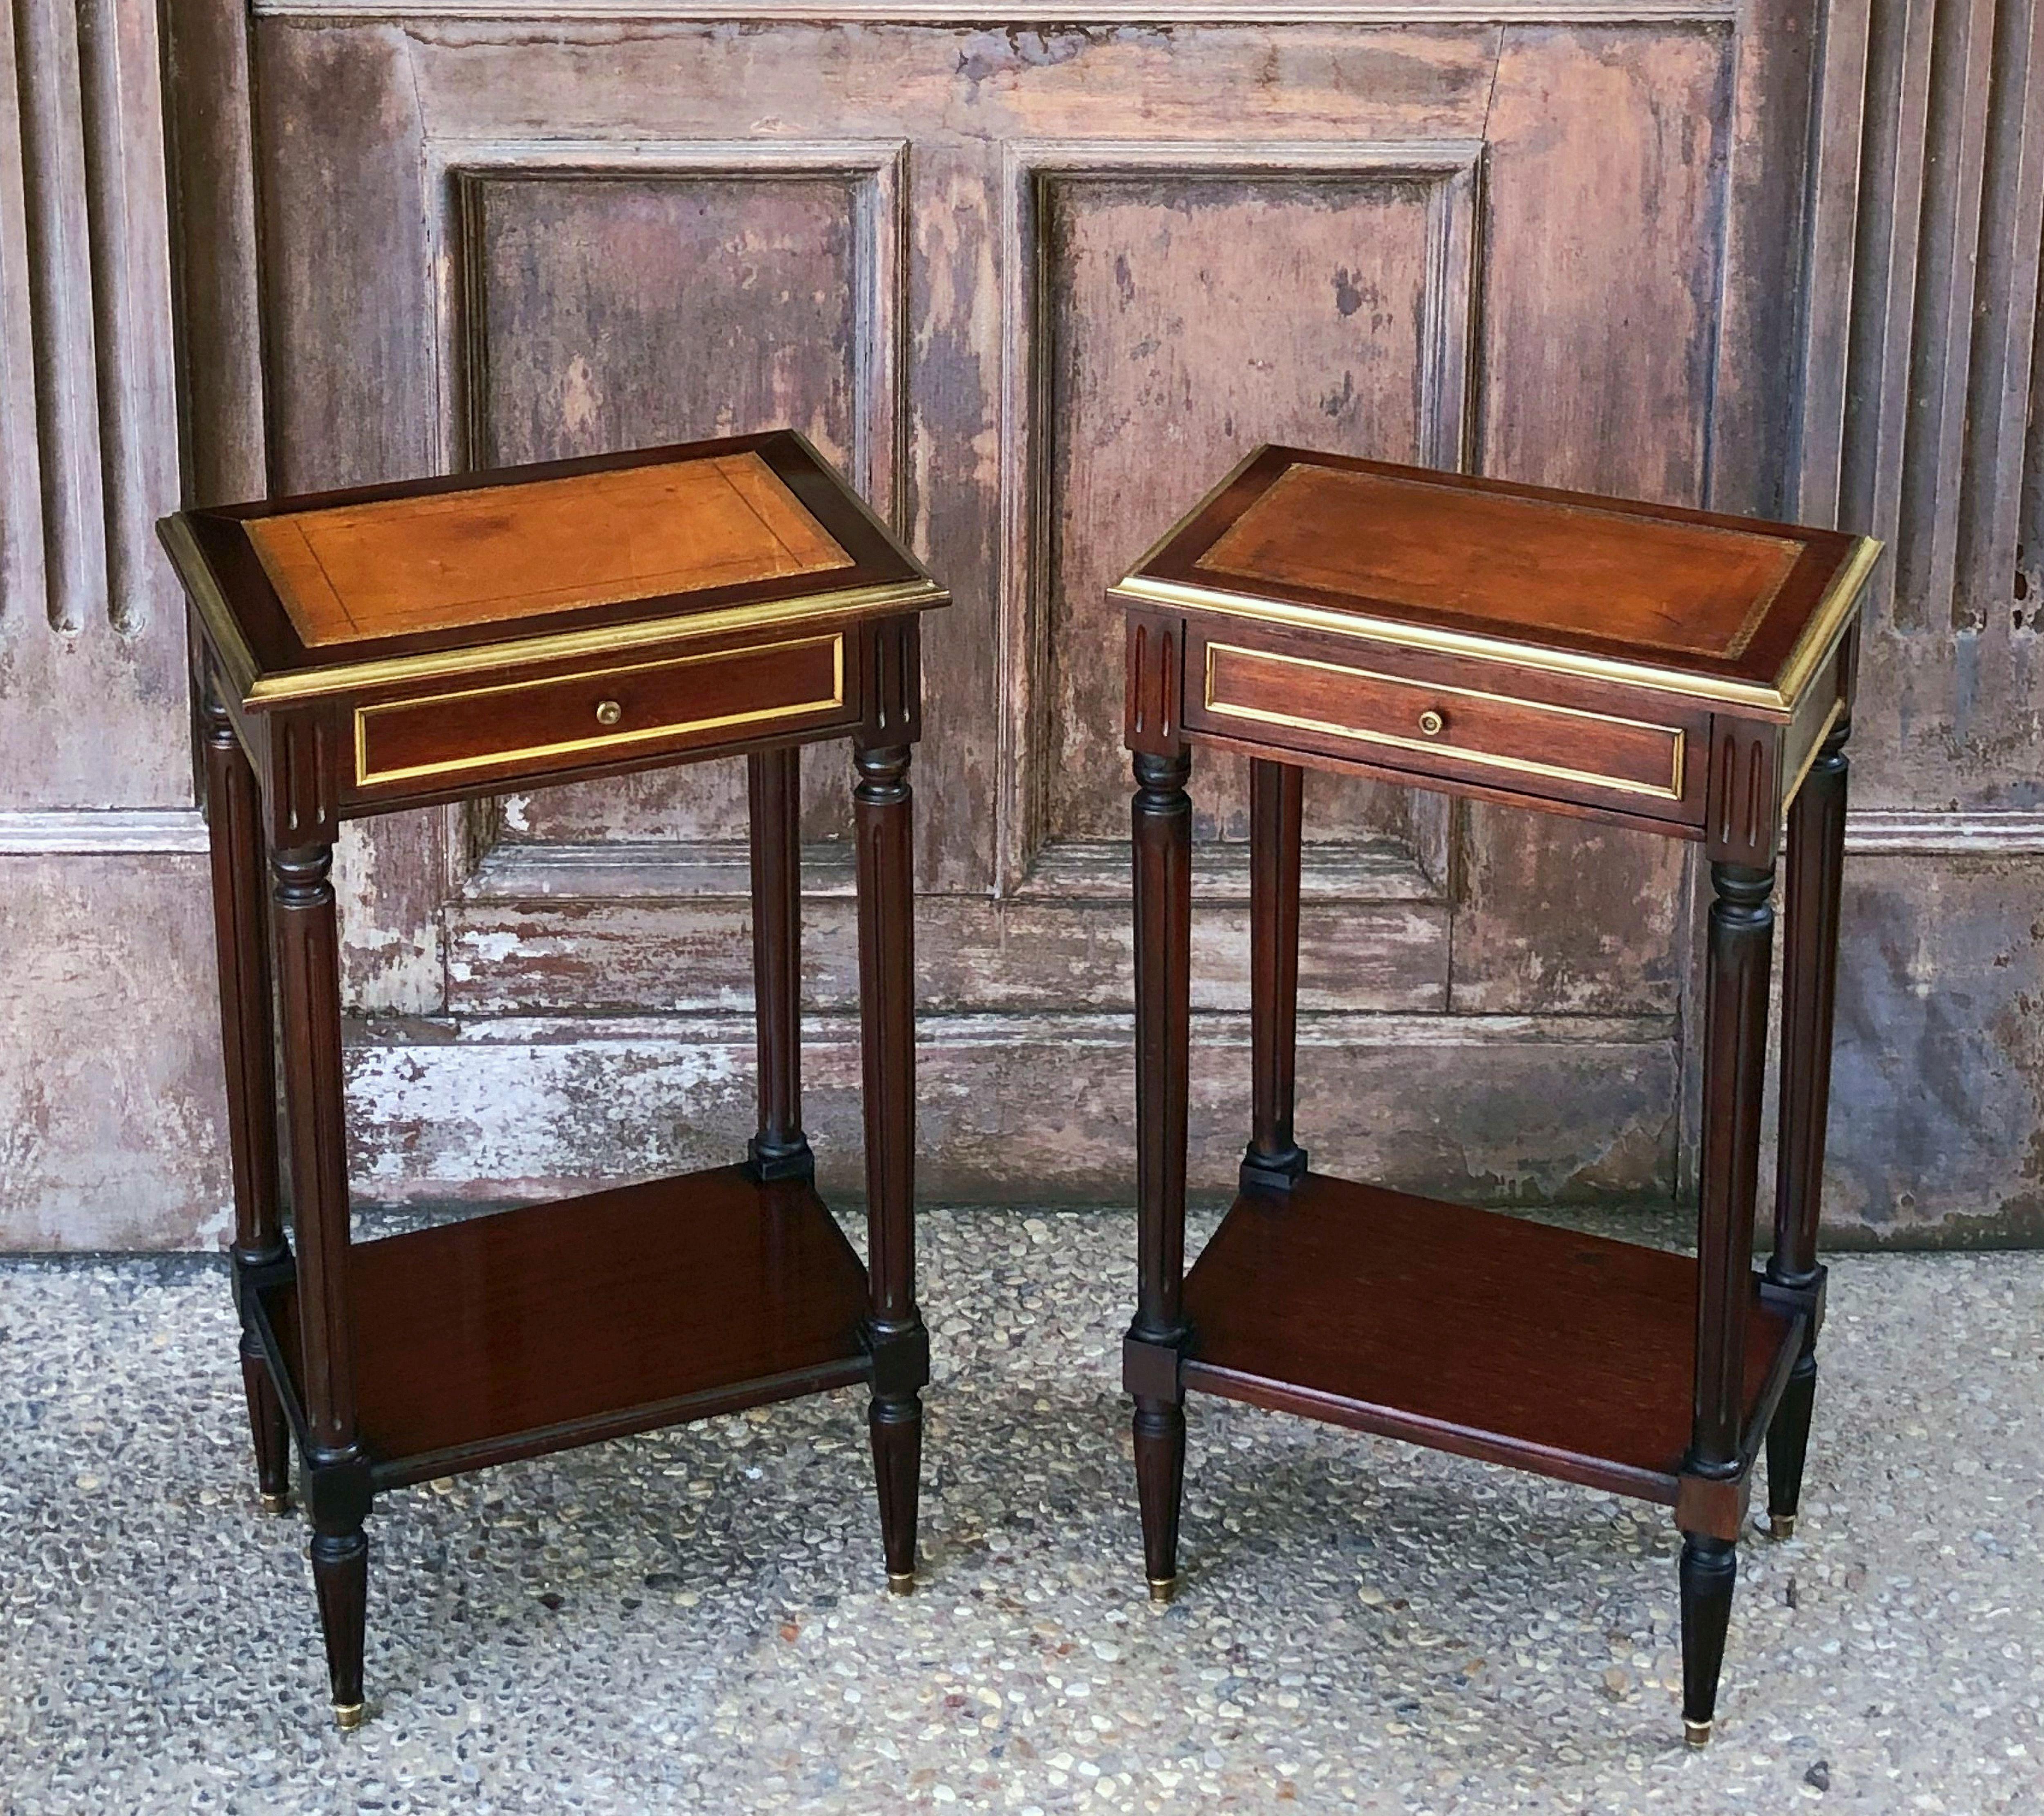 A fine pair of French side tables or nightstands (bedside tables), each table featuring a moulded rectangular top of mahogany with inset embossed leather and brass accents, over a frieze with drawer, and set upon four turned legs with lower